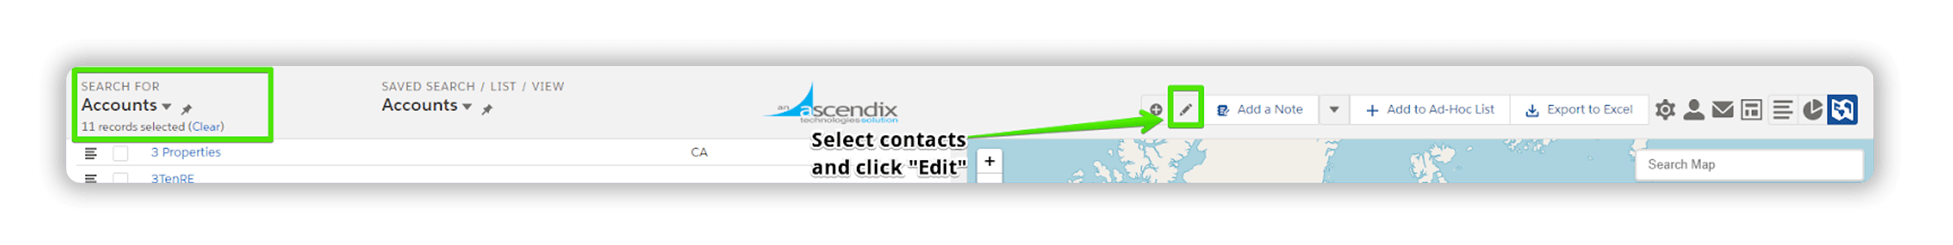 Select Contacts and click “Edit”